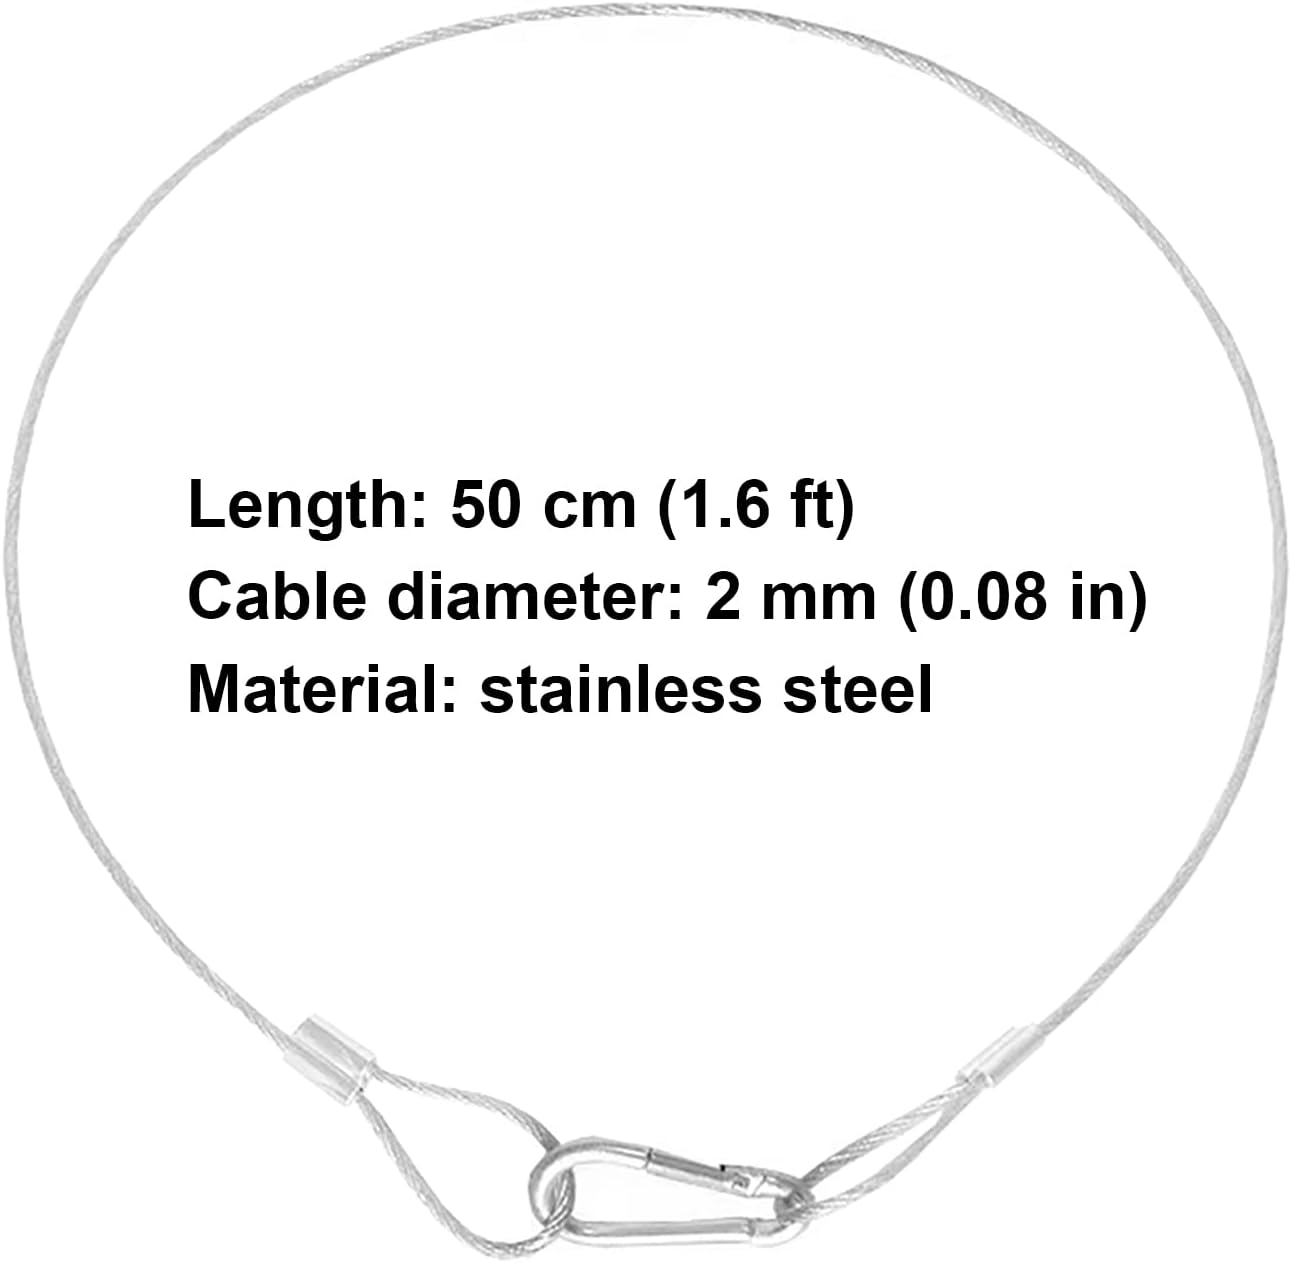 Mocking Bird Safety Cable Lock Short 2 ft, Braided Cable Wire Loop Ends, 1/8 in Diameter, Flexible Stainless Steel Lanyard for Travel,